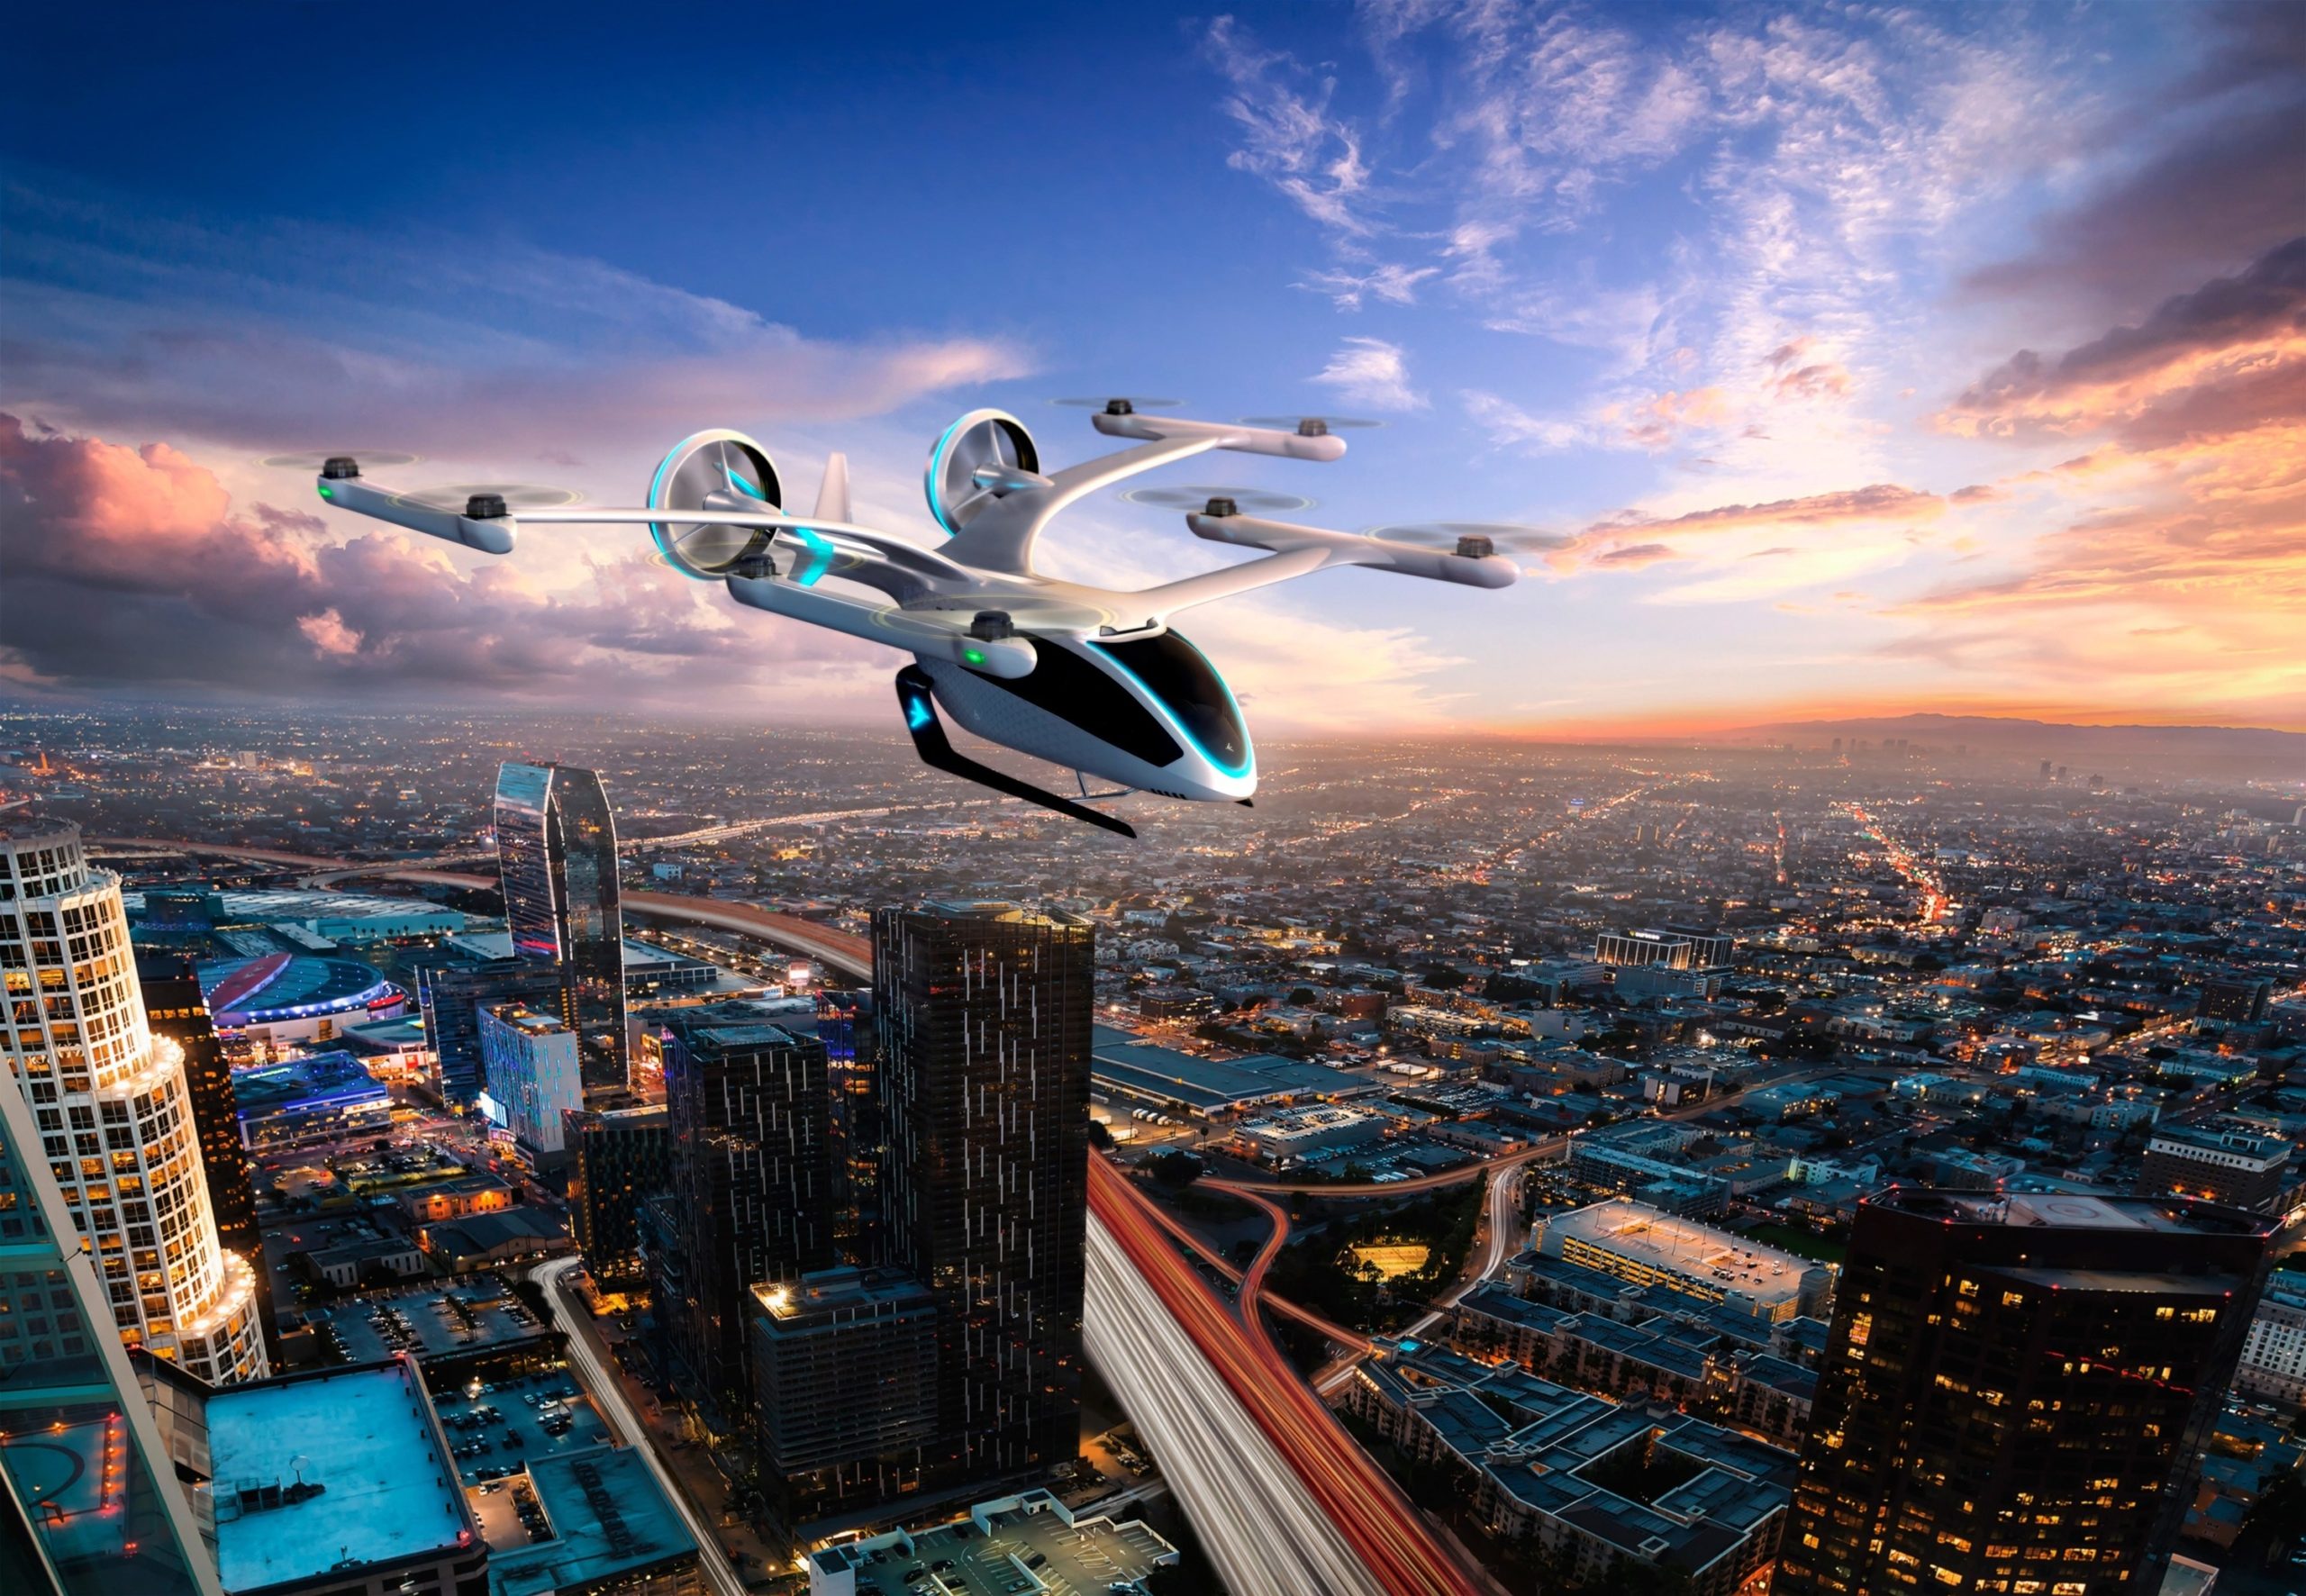 EmbraerX demonstrates the future of urban air mobility and accessibility at SXSW 2019